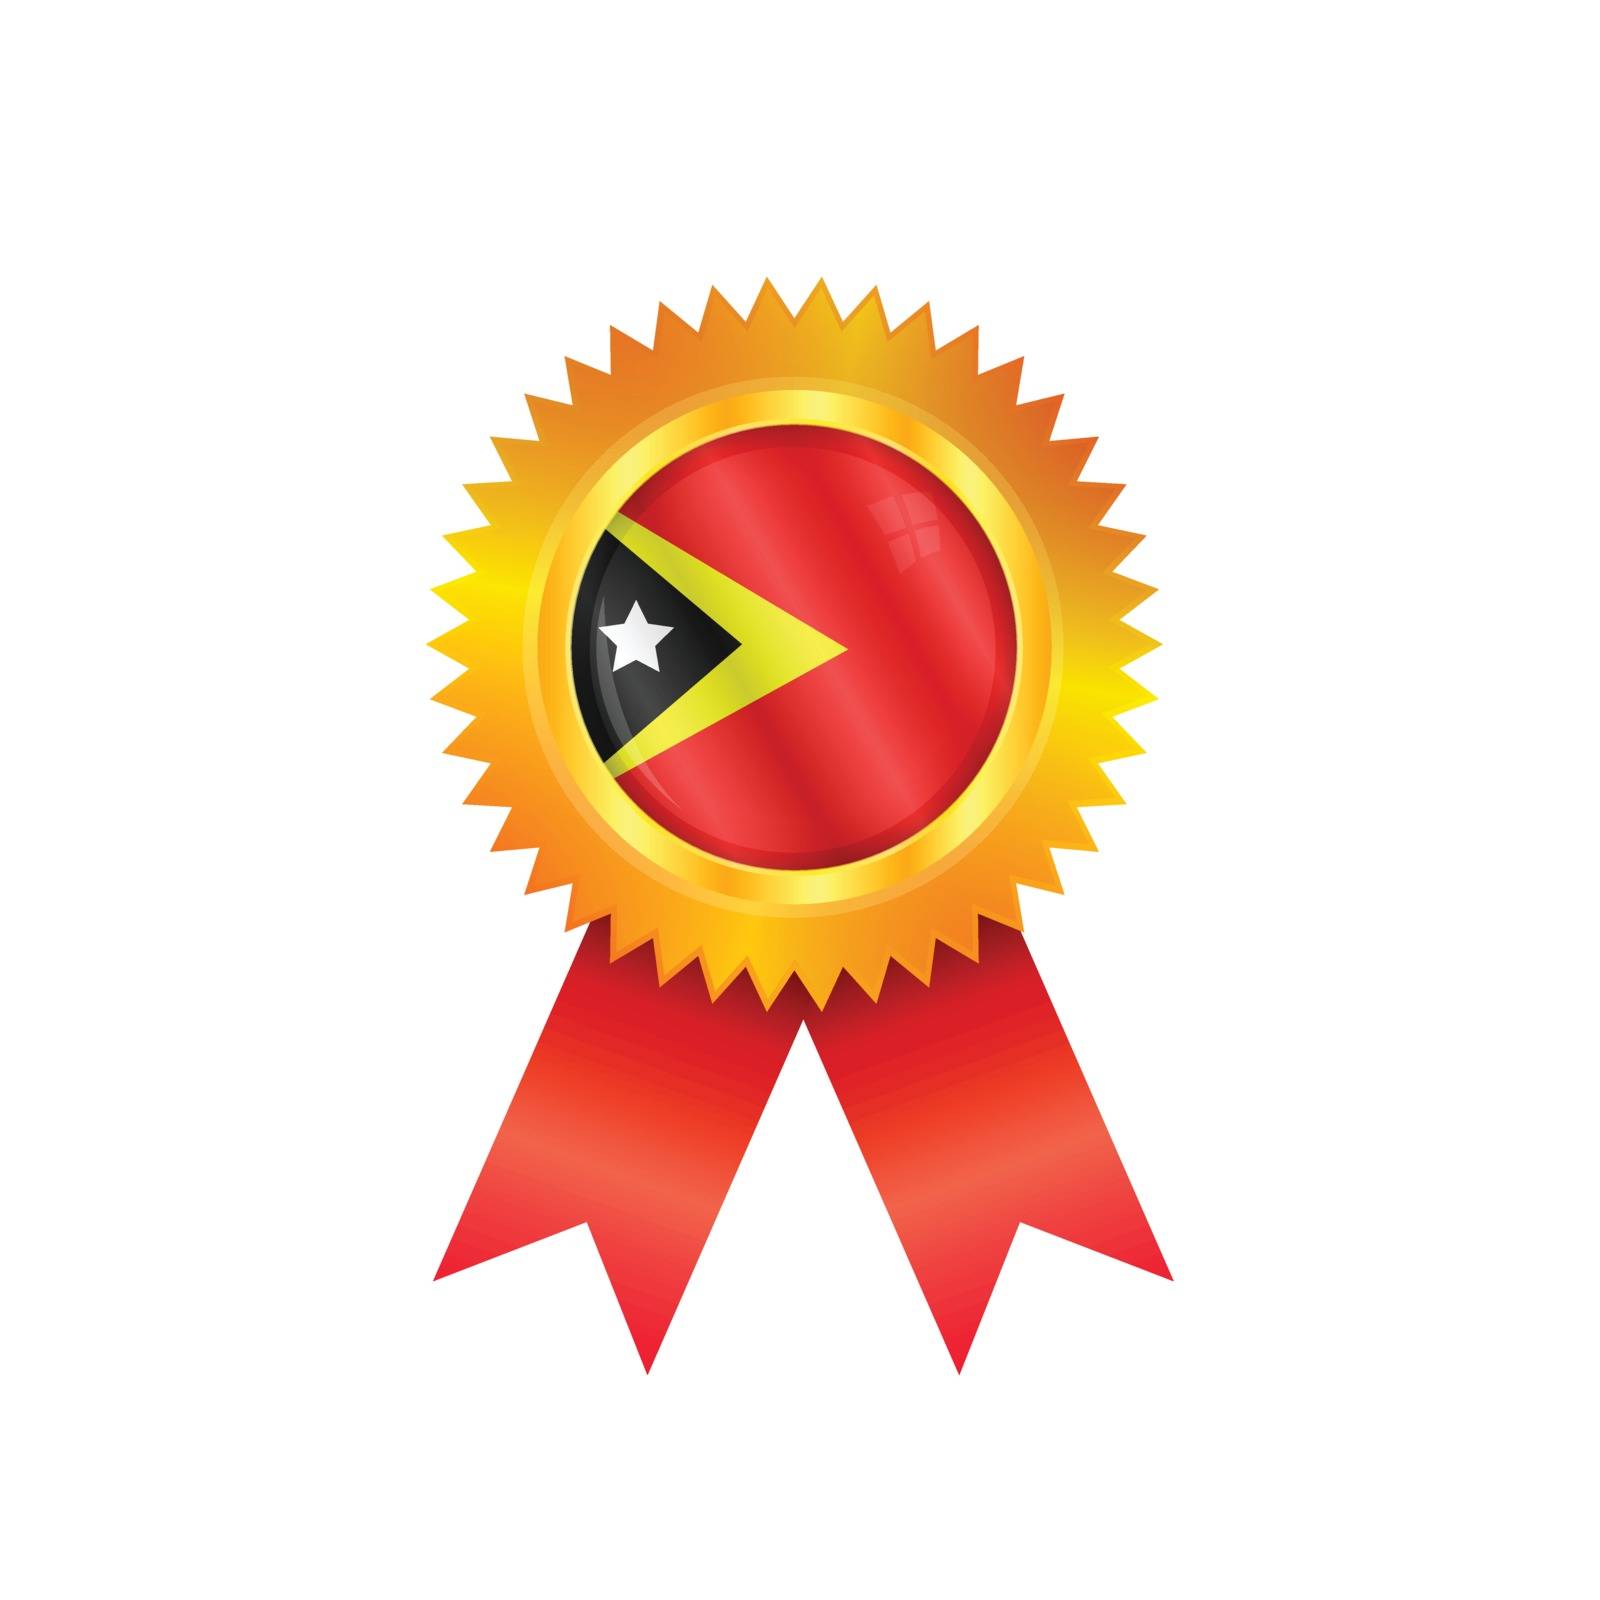 Timor medal flag by Sportactive